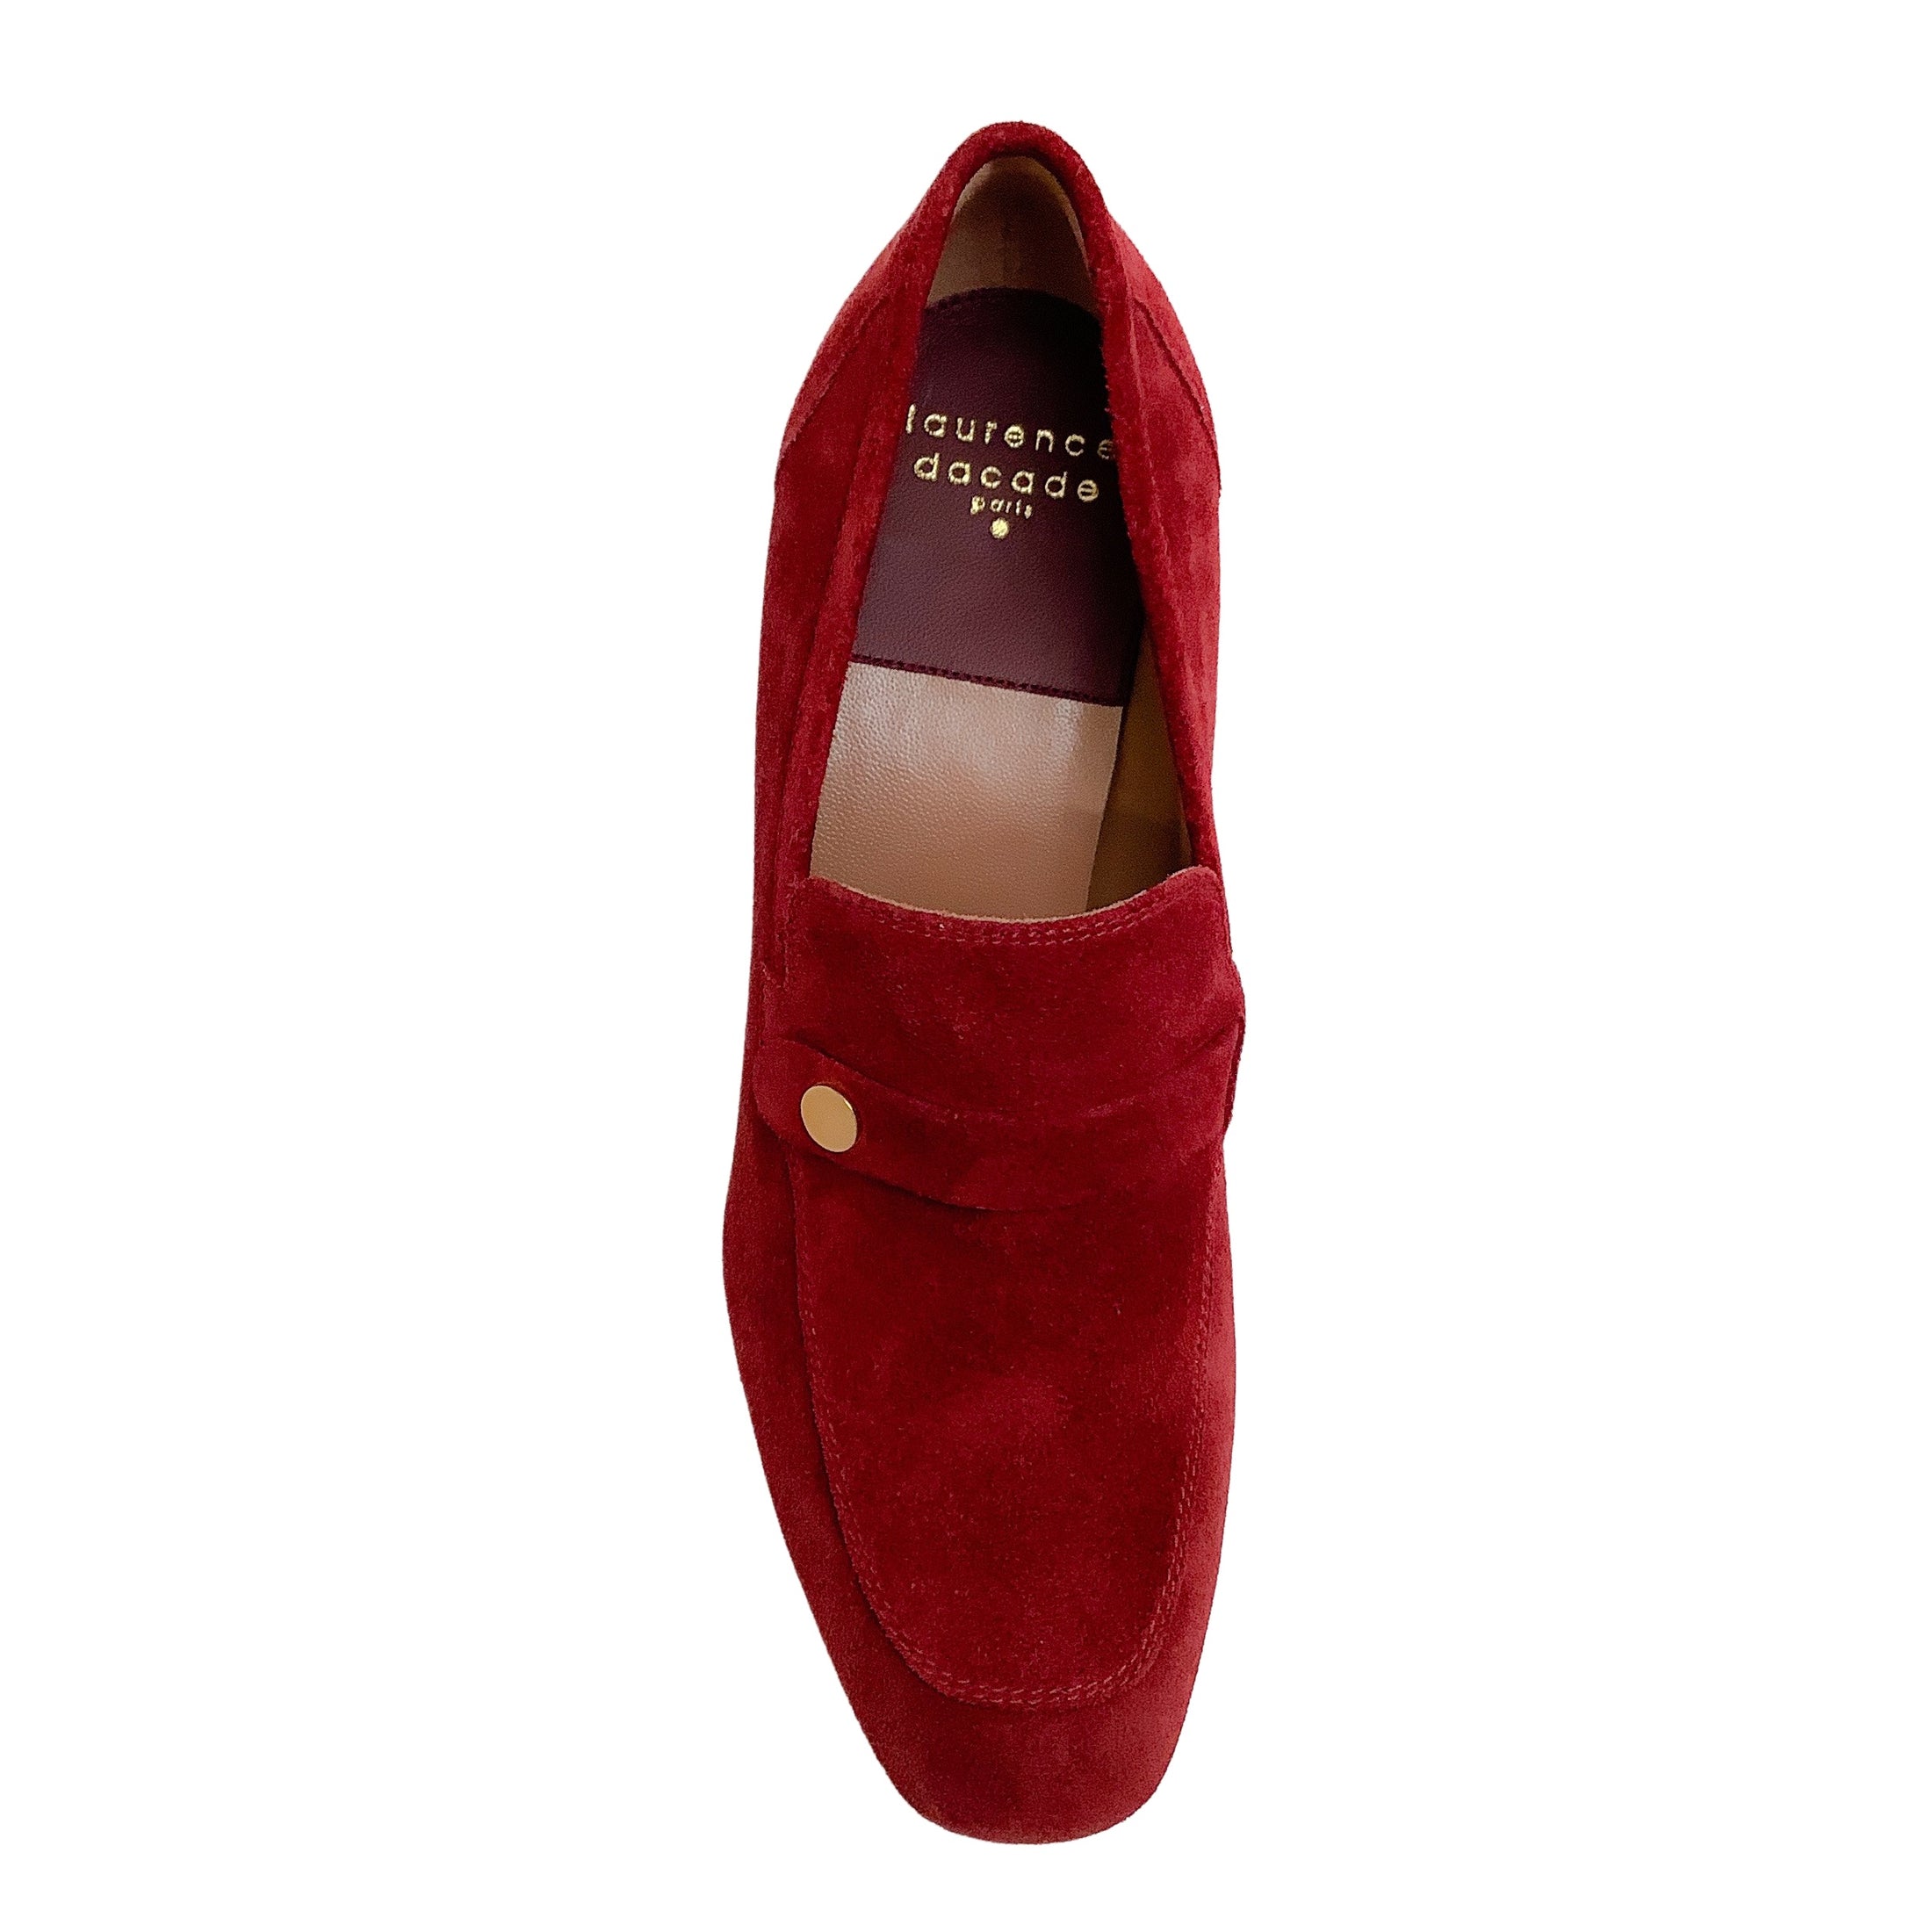 Laurence Dacade Wine Suede Tracy Loafer Pumps